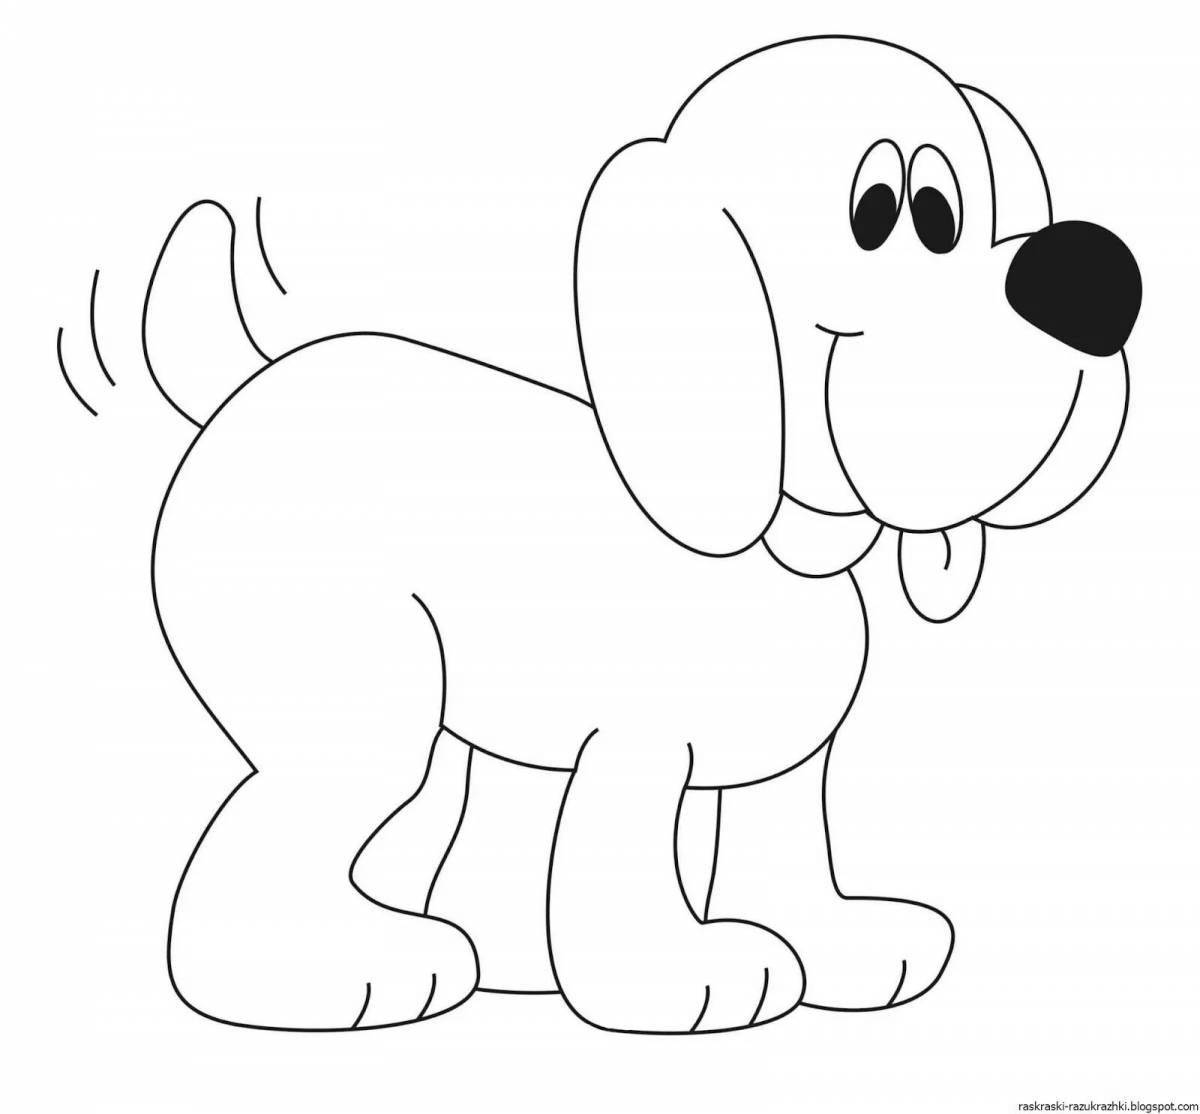 Puppy coloring page for kids